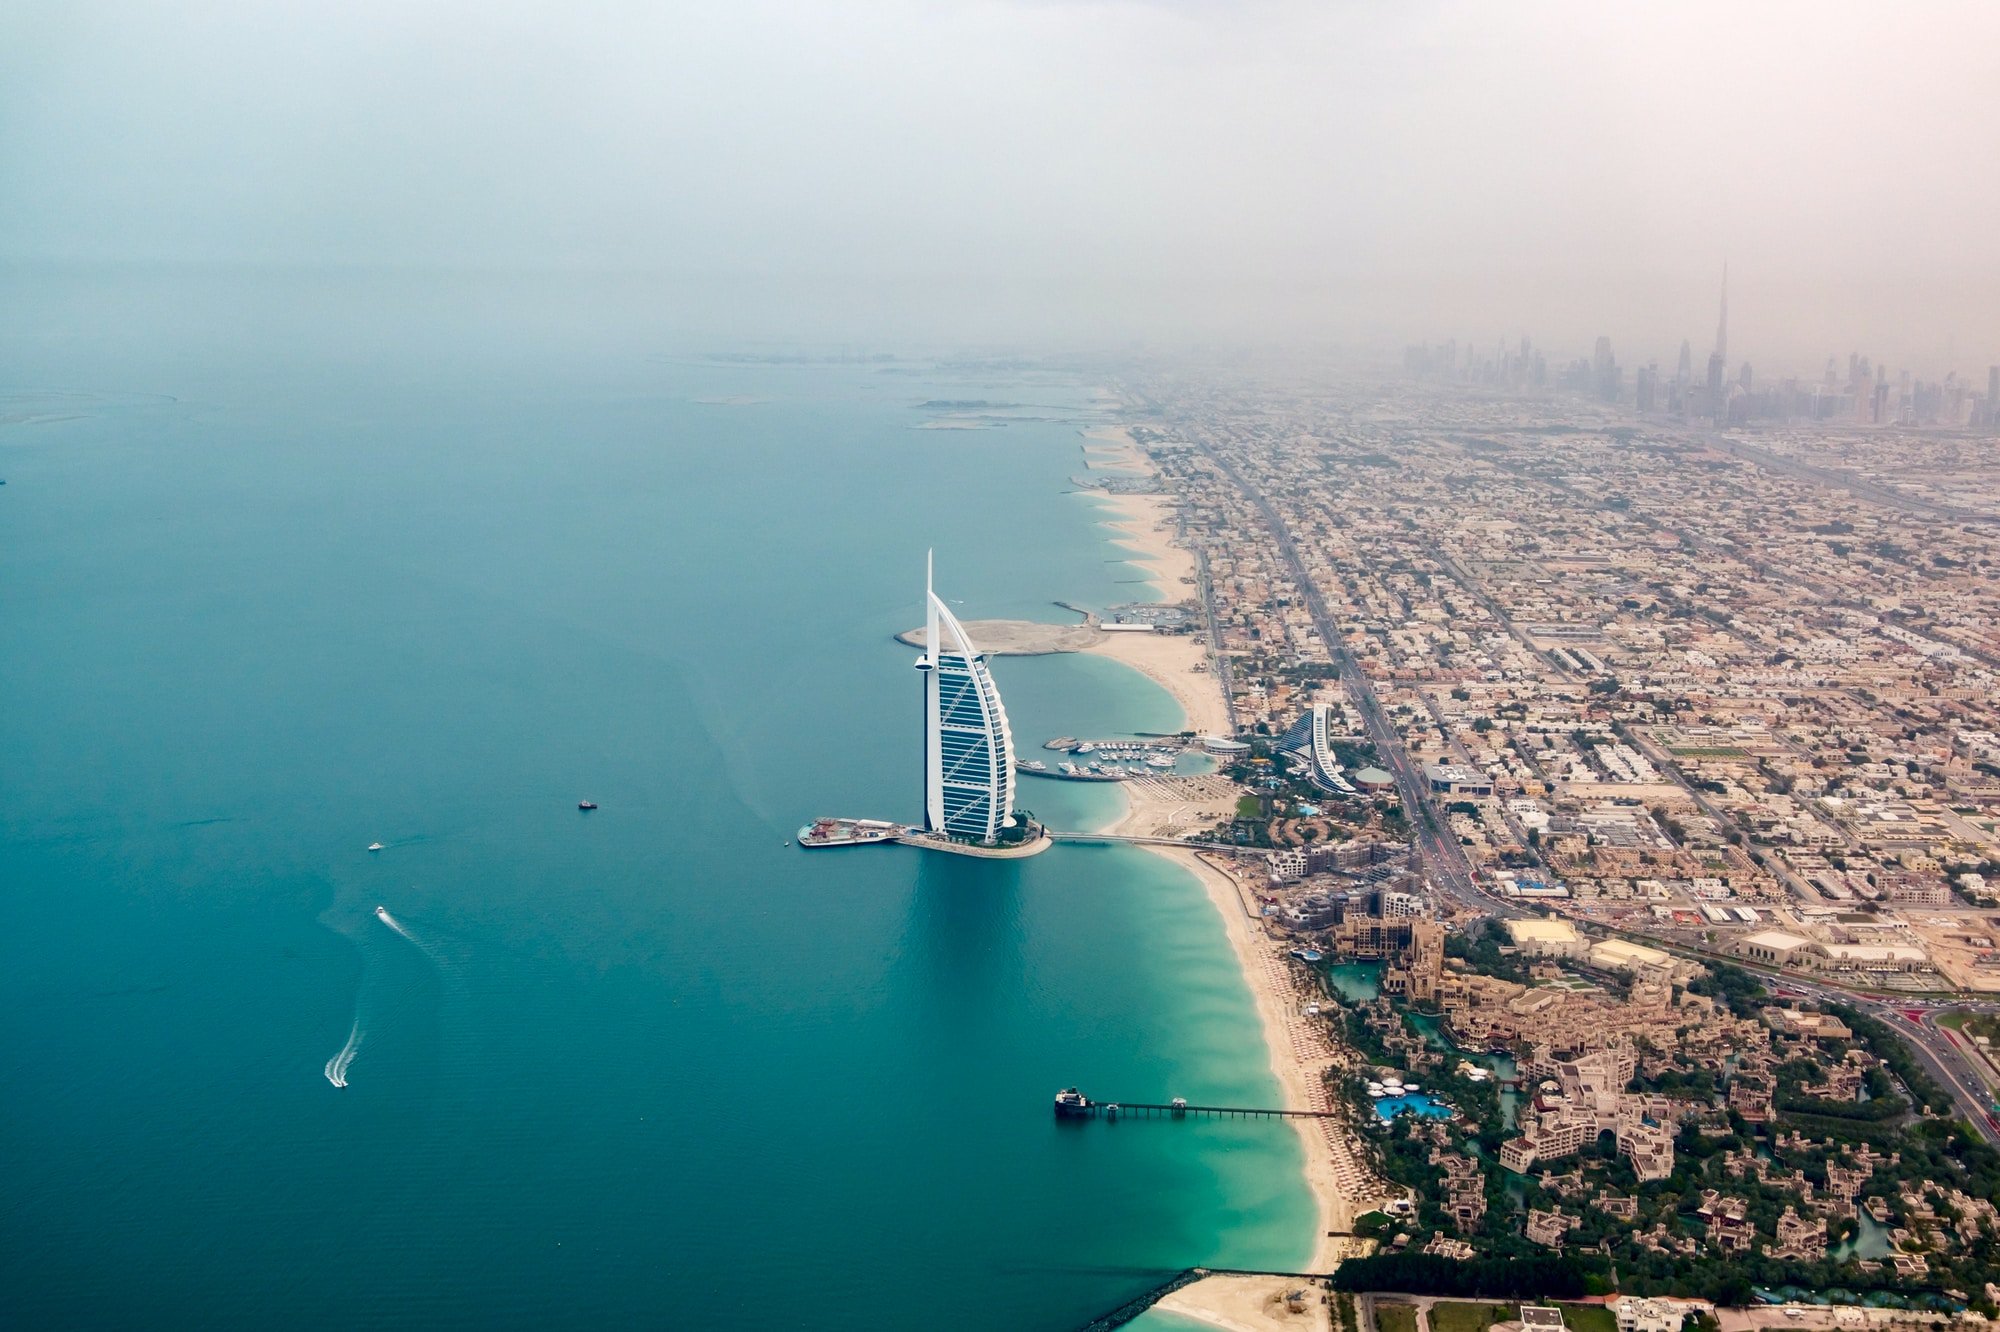 The World Fair is the icing on the cake for Dubai's resurgent housing market